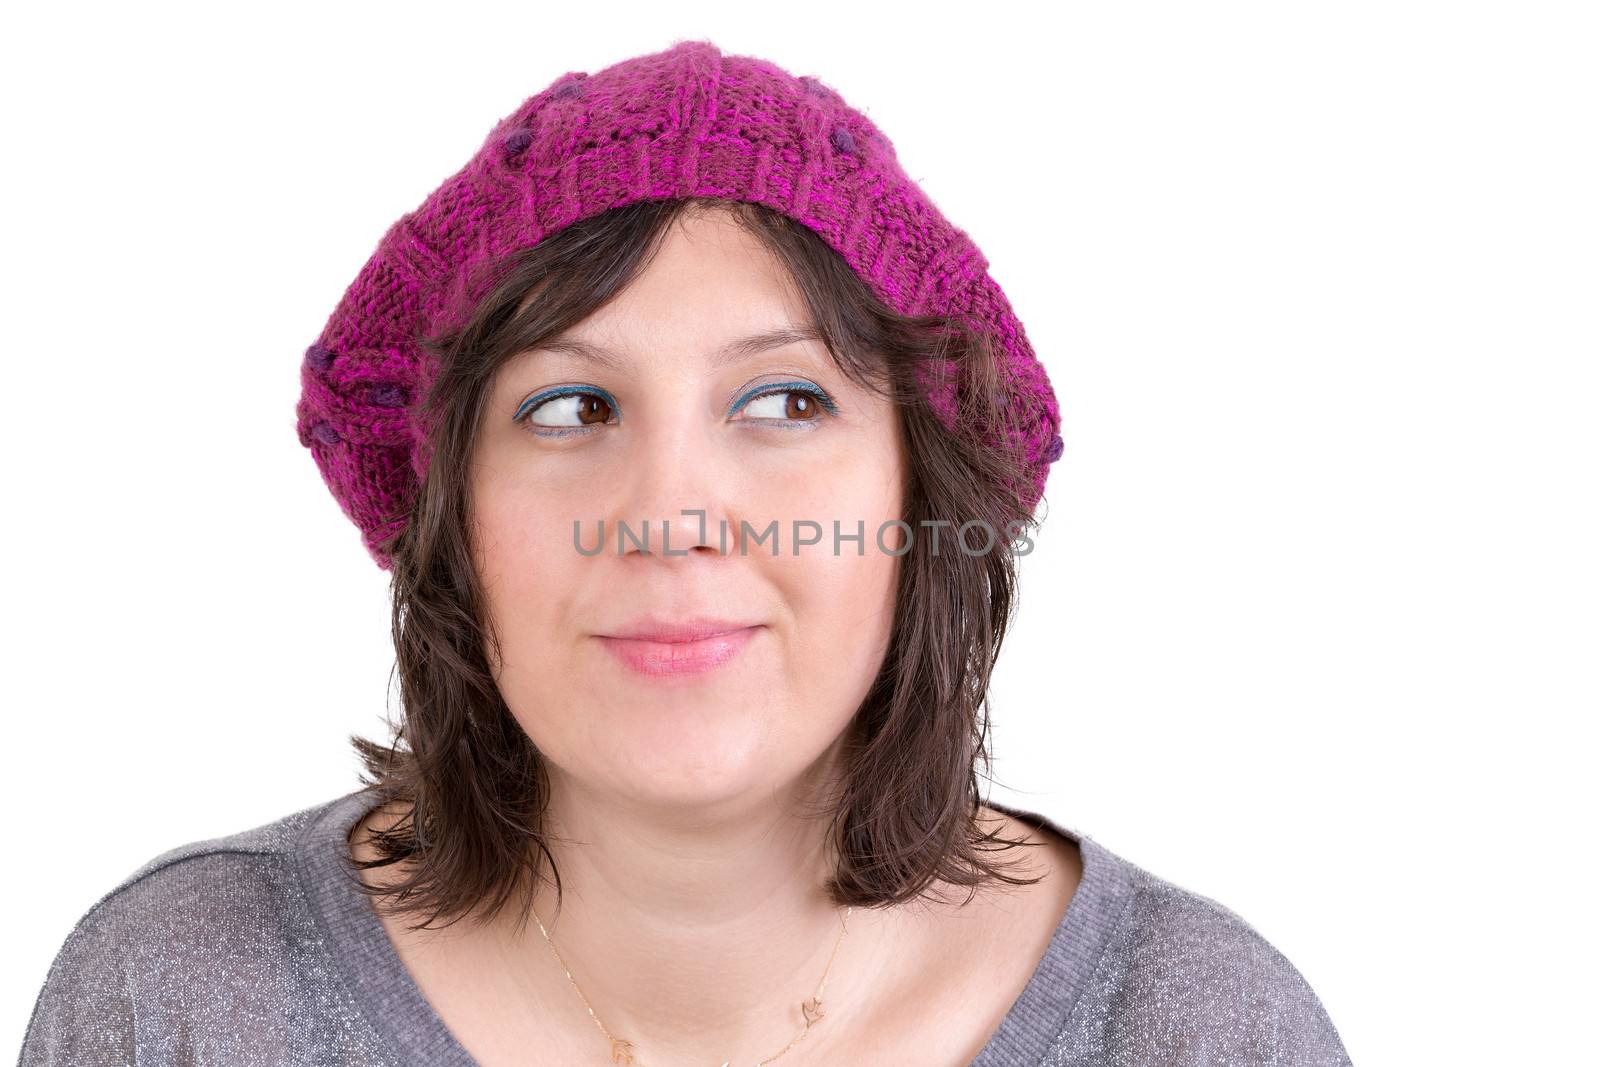 Thoughtful woman wearing a knitted purple winter cap smiling in anticipation of being able to realise her dreams, looking off with her eyes to the side and smiling, isolated on white